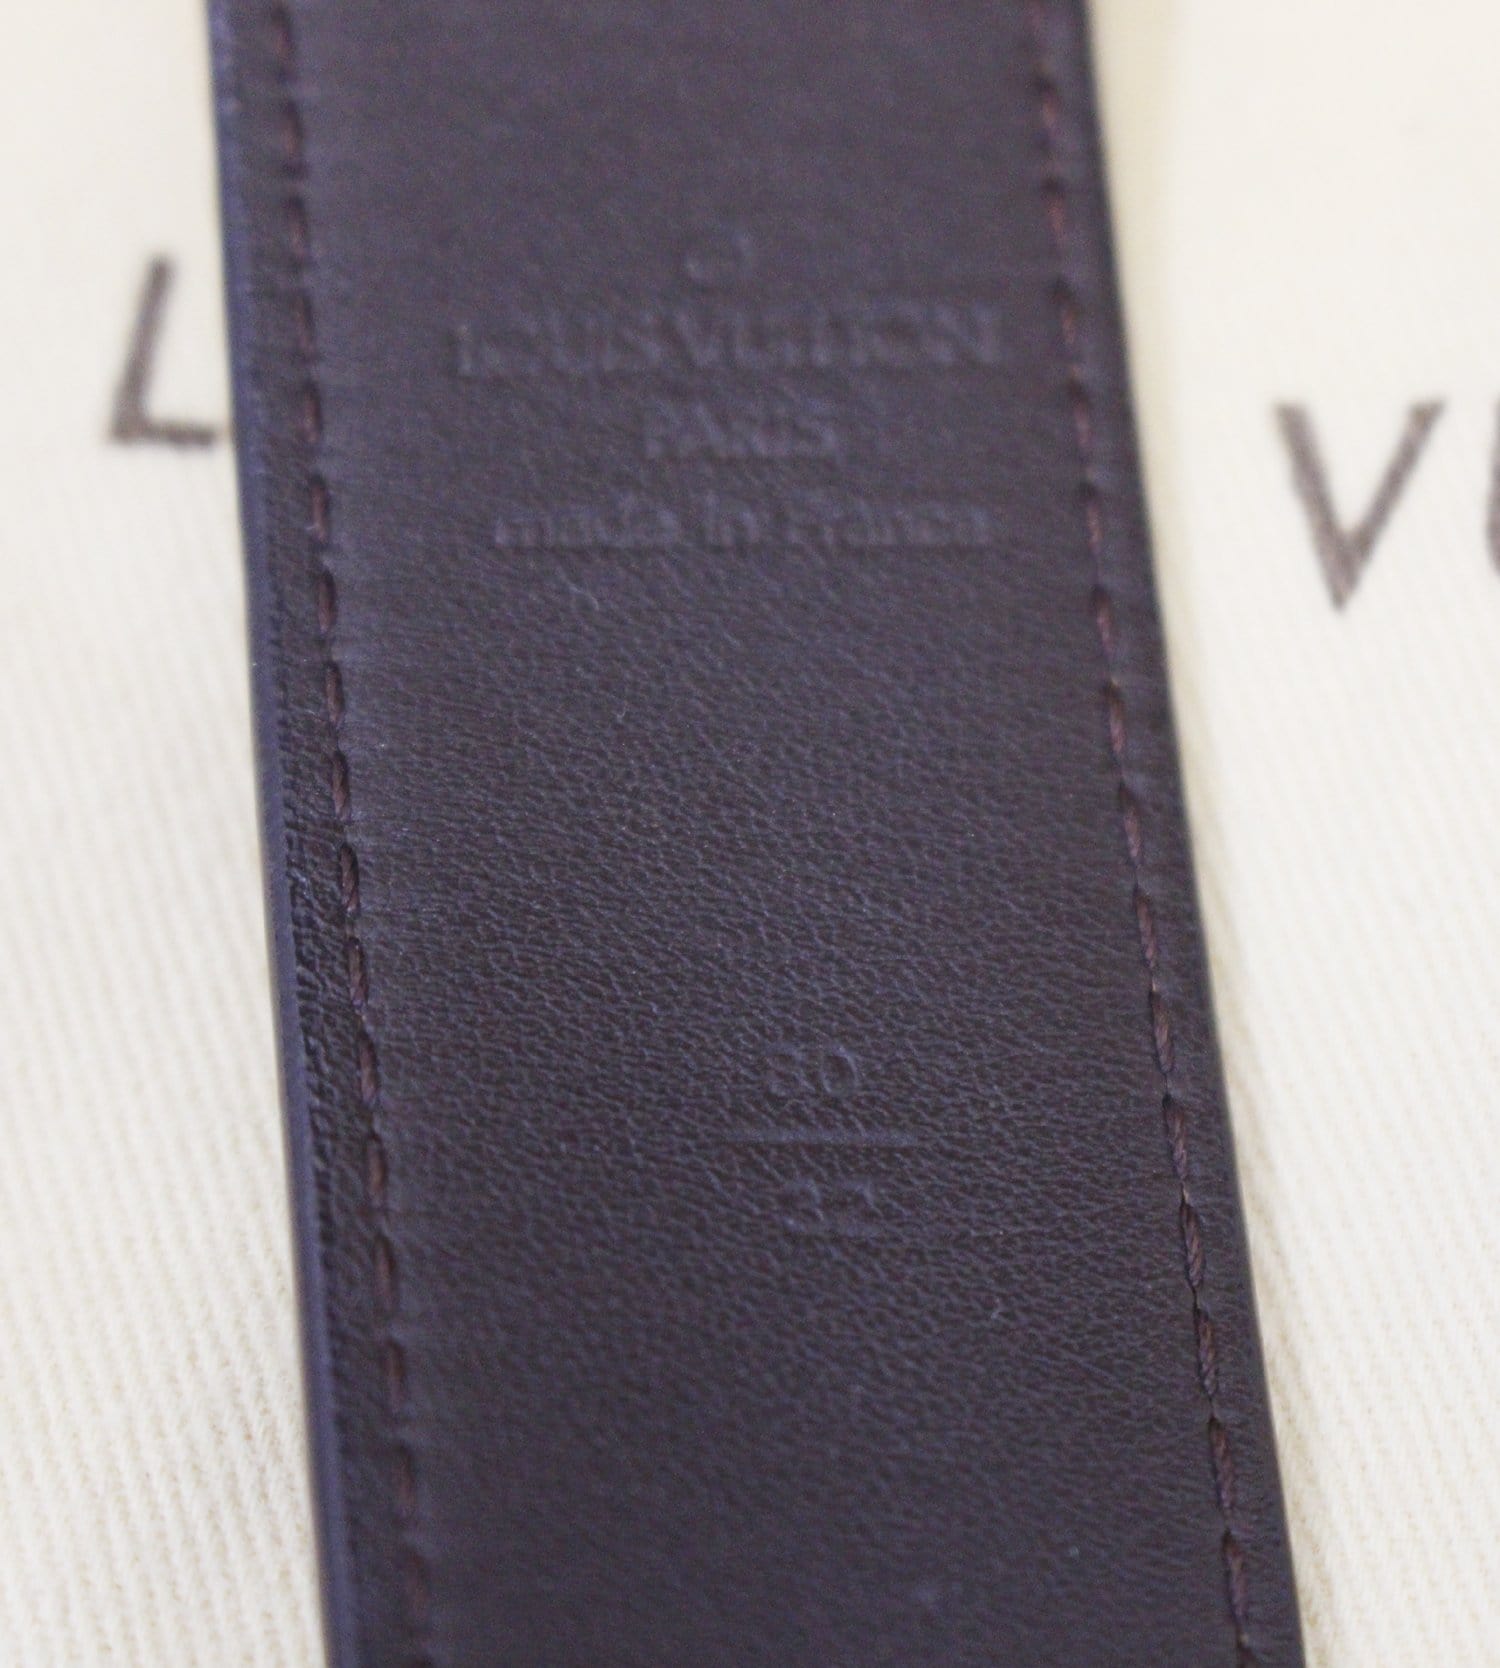 Leather belt Louis Vuitton Brown size 90 cm in Leather - 20879932